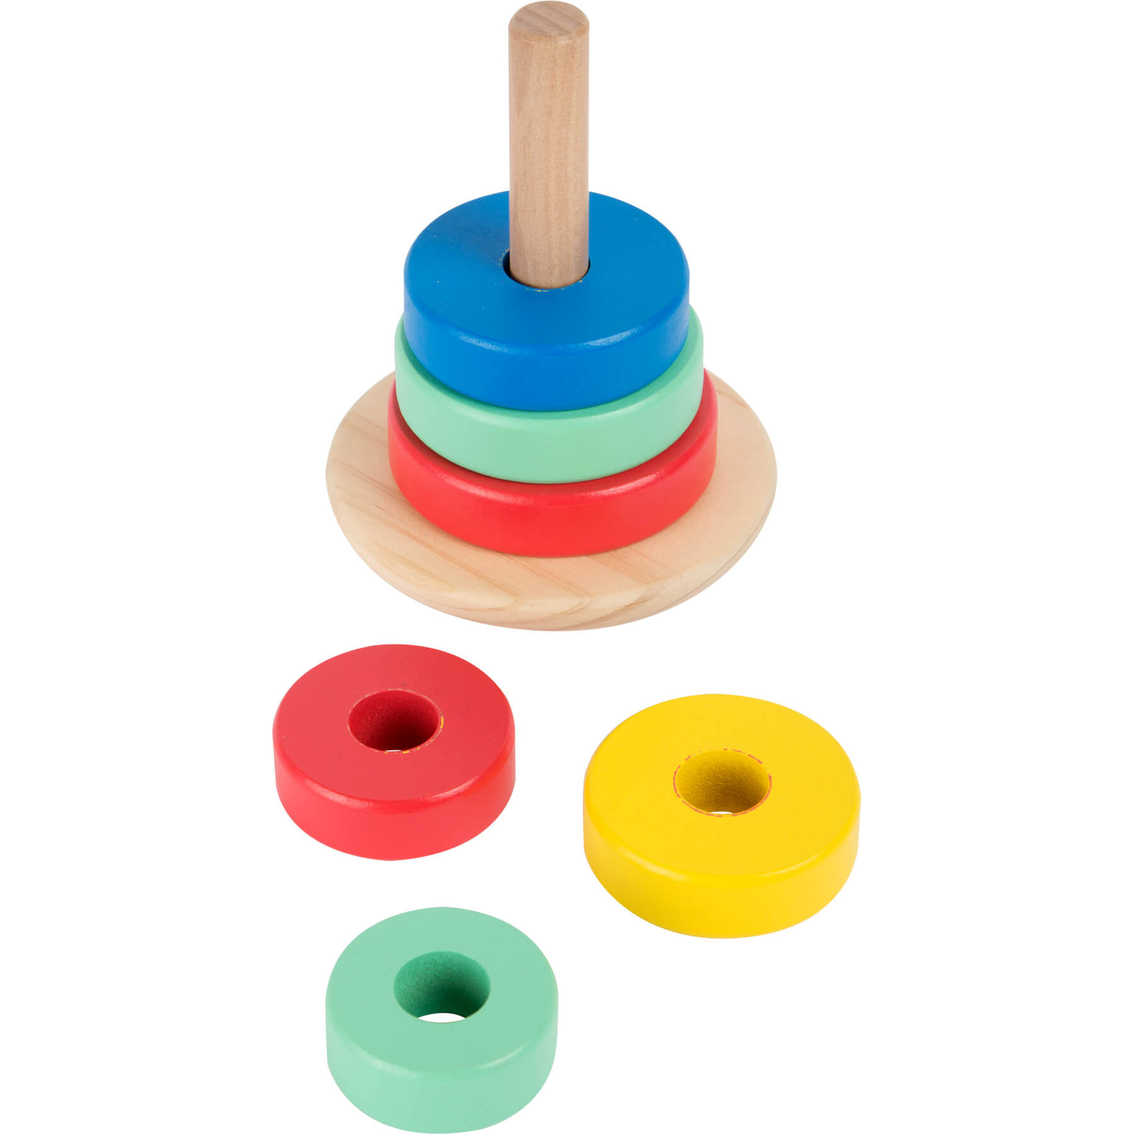 Small Foot Wooden Toys Game Of Skill Stacking Tower Move It! Playset - Image 2 of 3